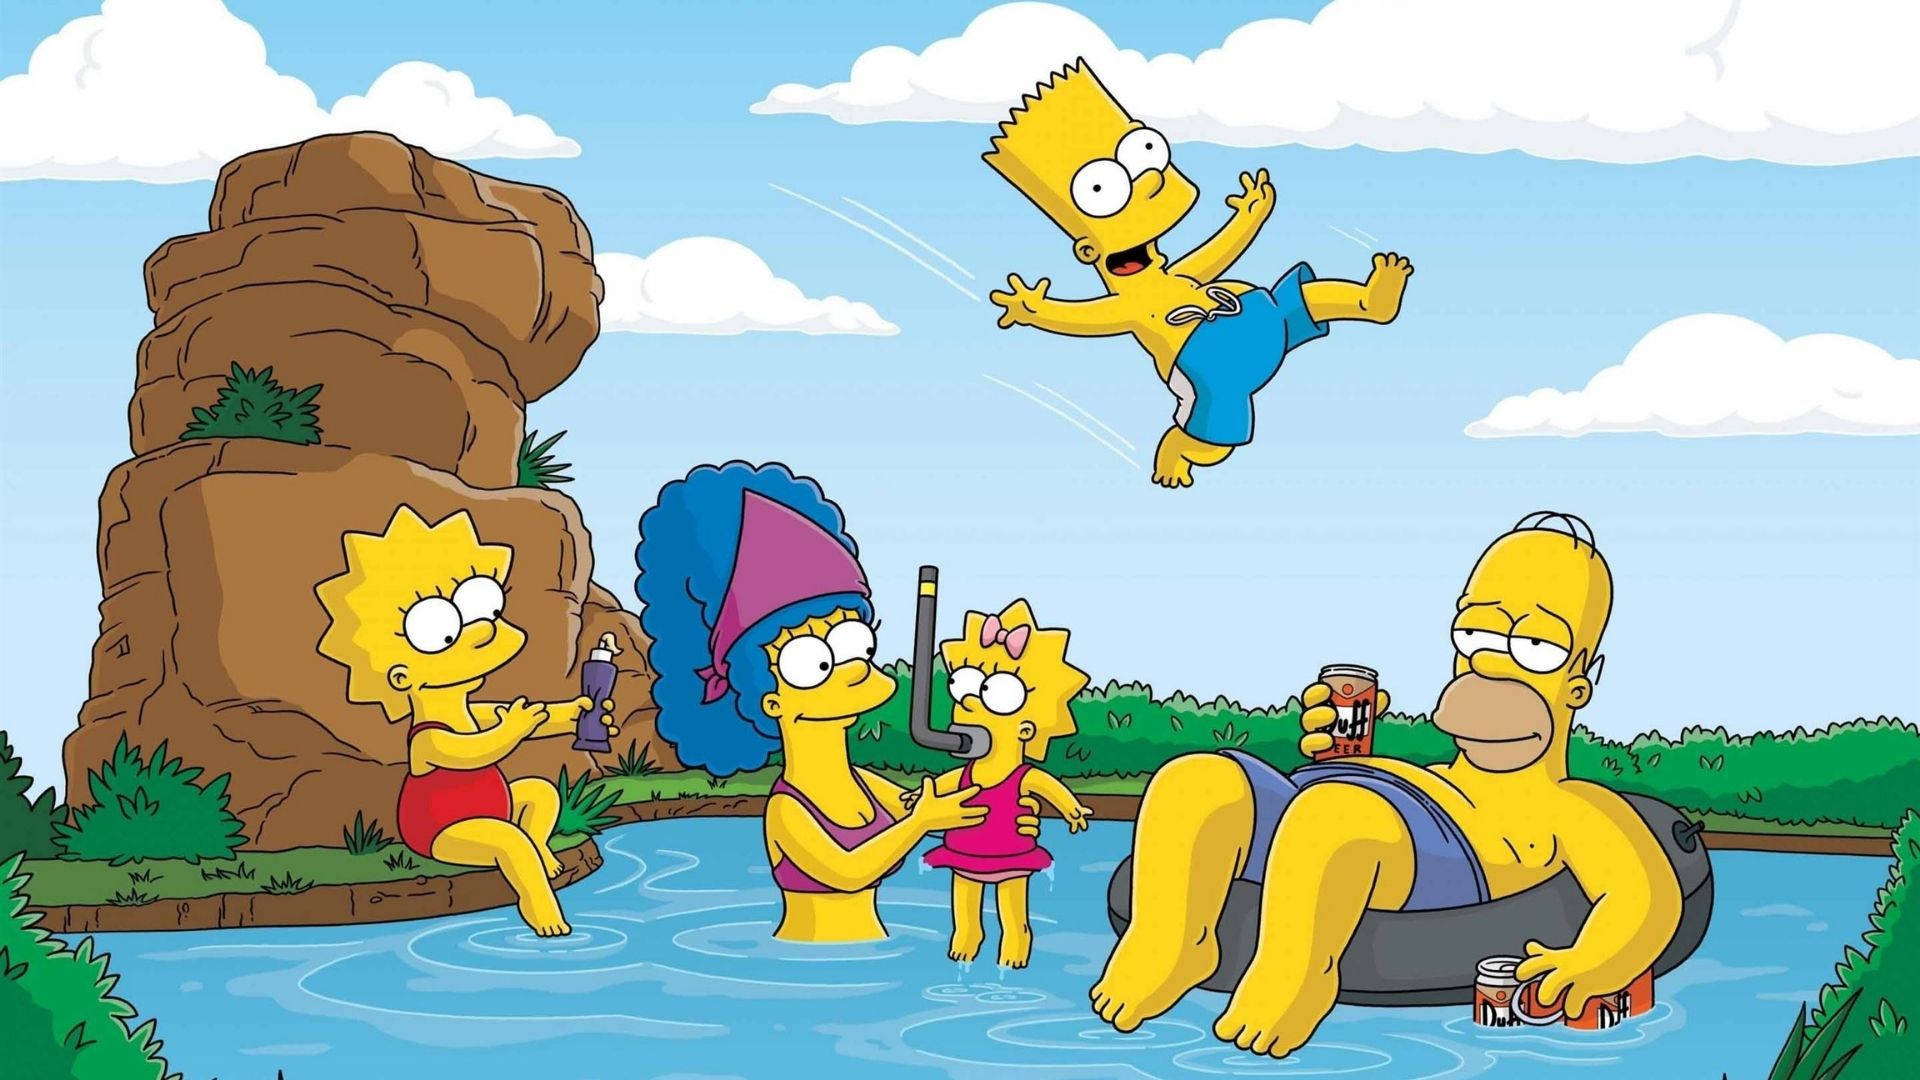 The Simpsons By The Lake Cartoon Wallpaper